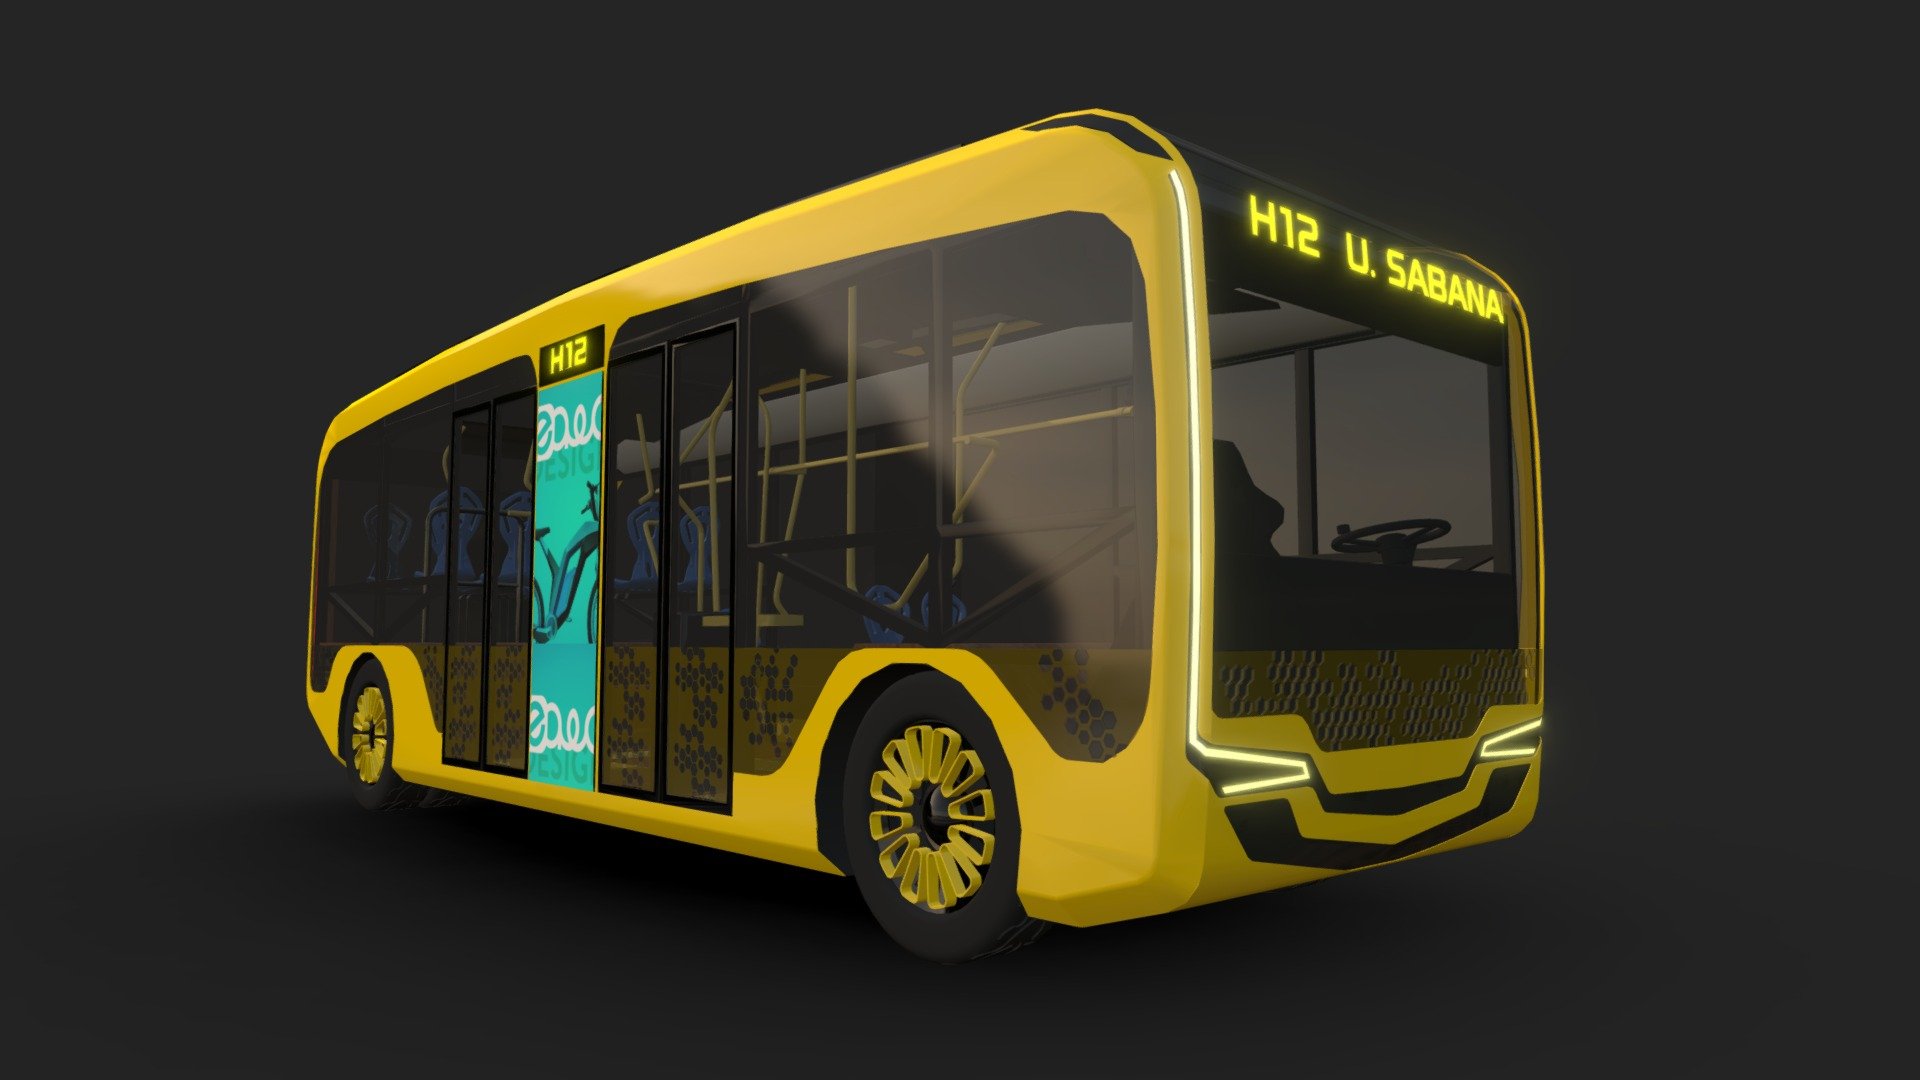 Eddie Mauro™. Inti electric bus concept. 2012. Product and car design. Team work with Crystian Hoyos.

More info here: https://www.behance.net/gallery/4955183/Inti-Electric-Solar-bus - Inti electric bus - Buy Royalty Free 3D model by Eddie Mauro ™ (@edgarkhan) 3d model